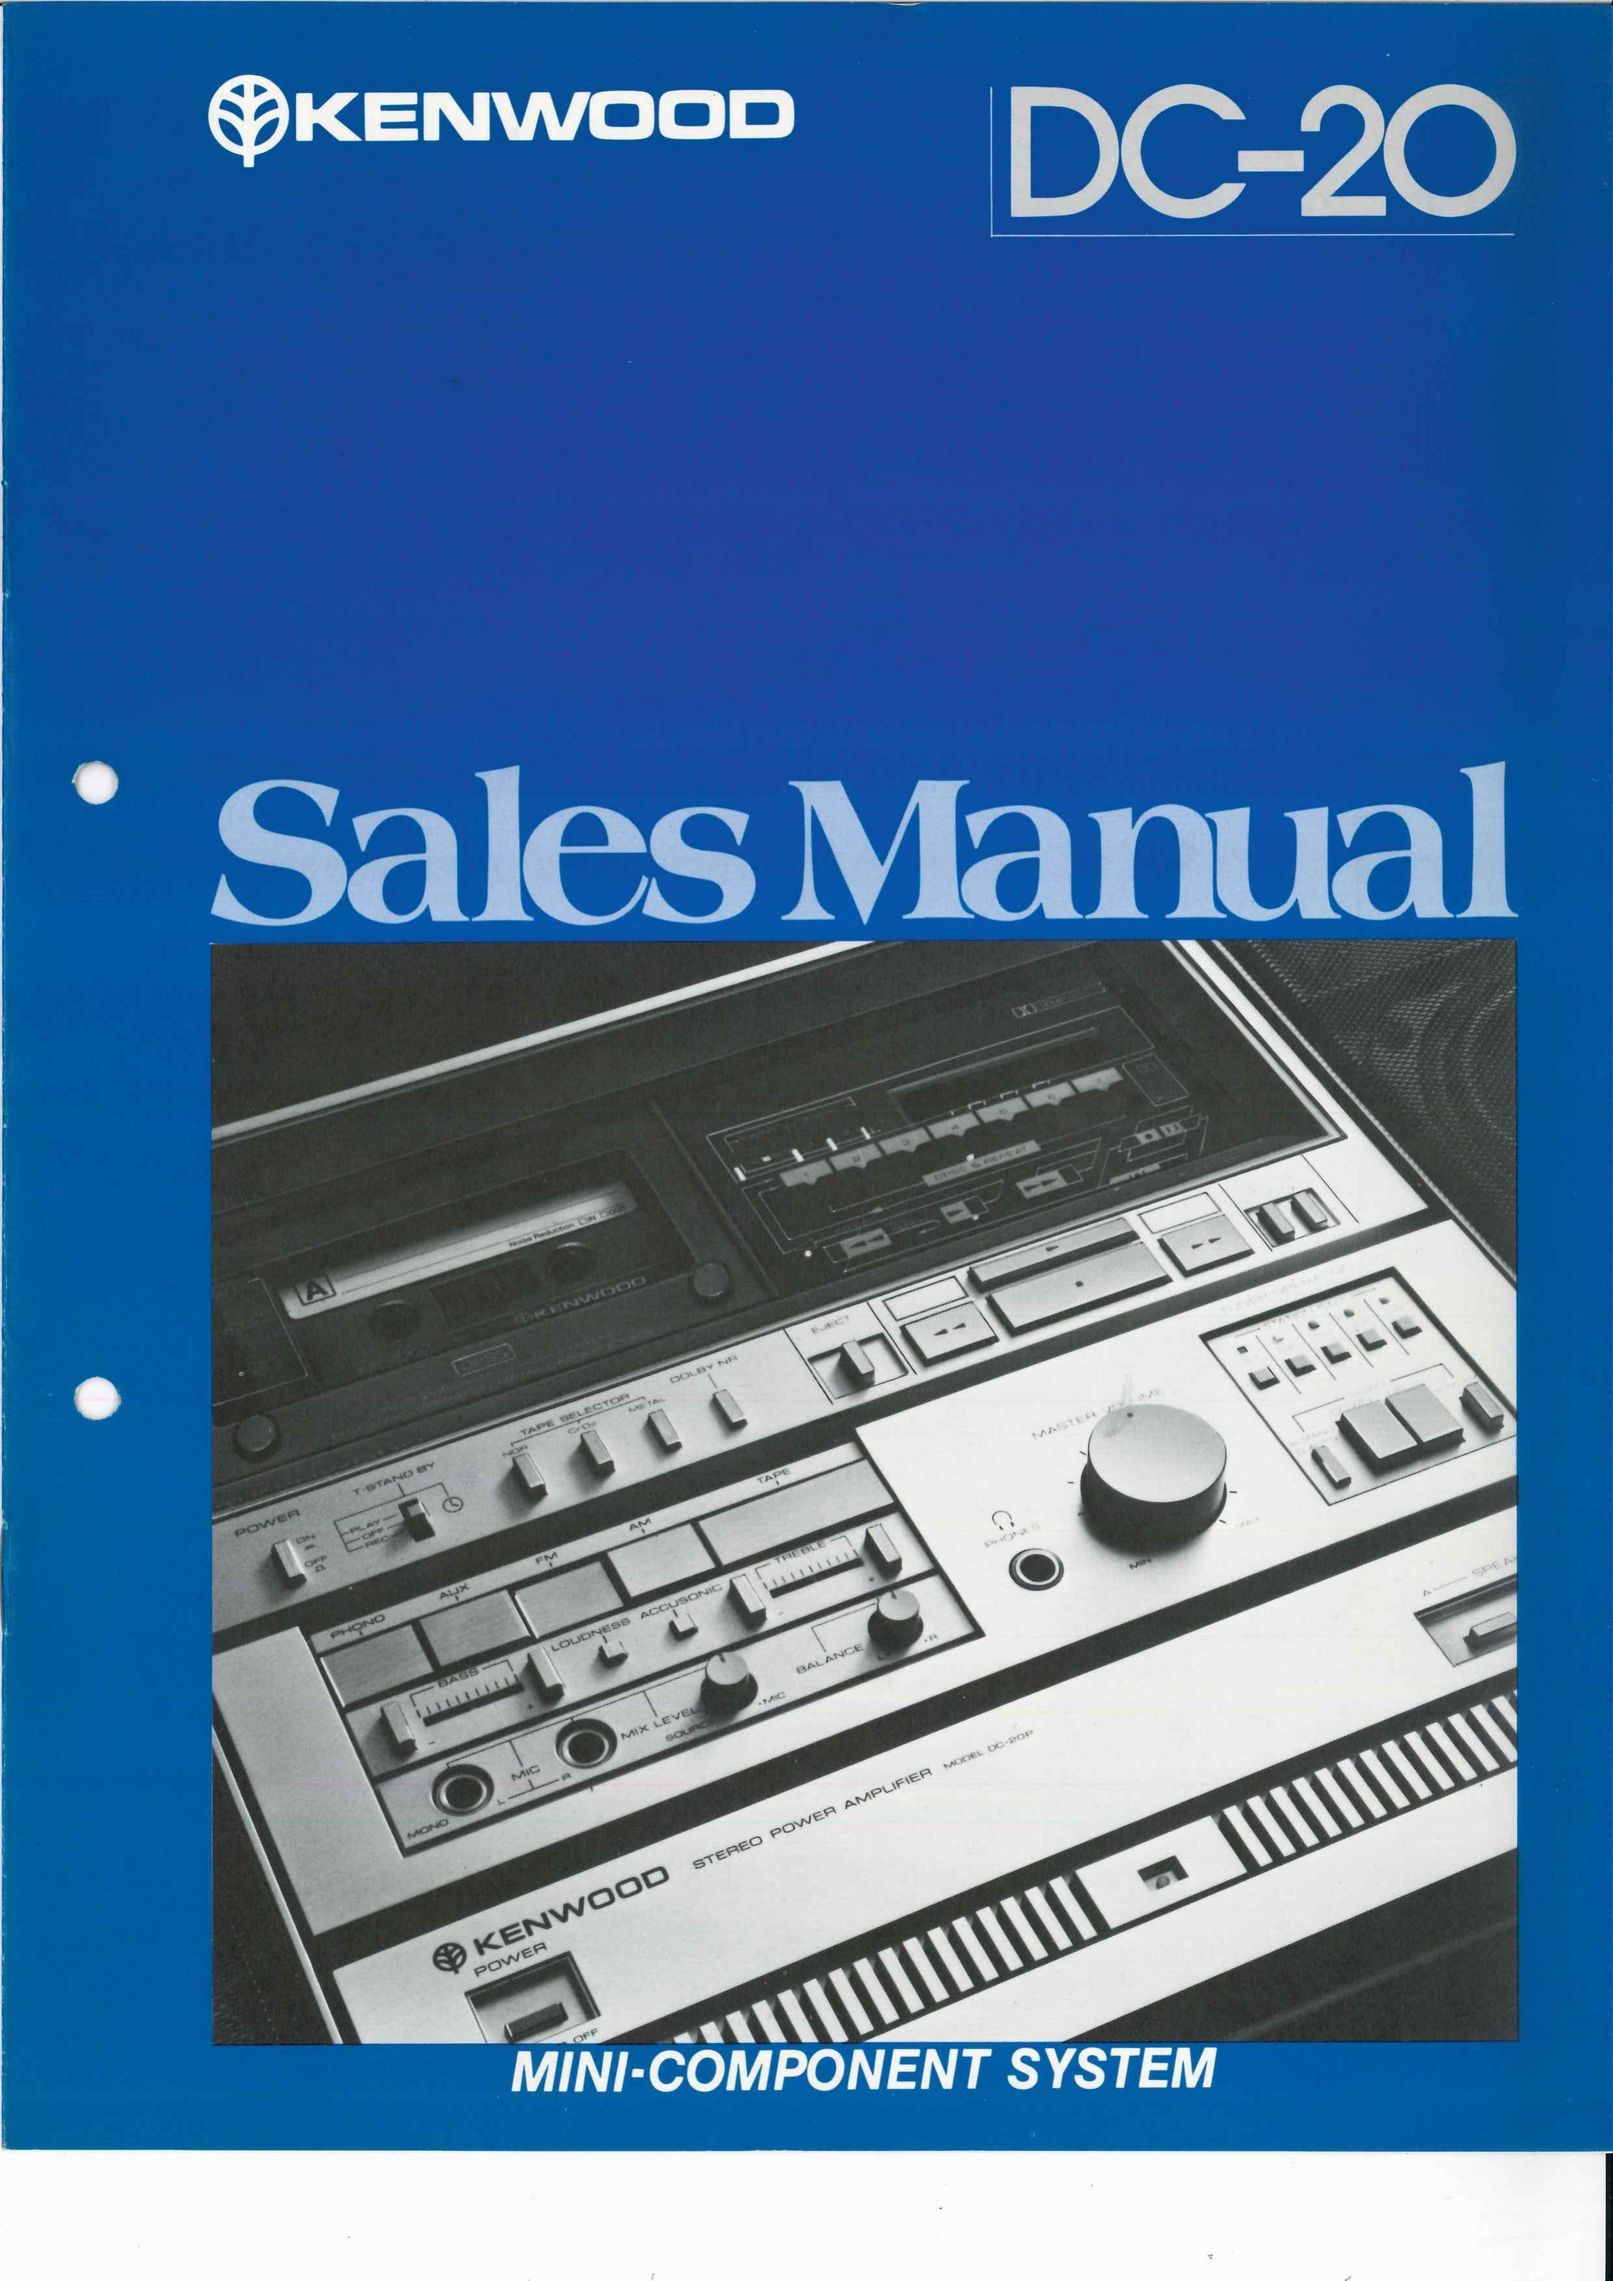 Kenwood DC-20 Stereo System User Manual